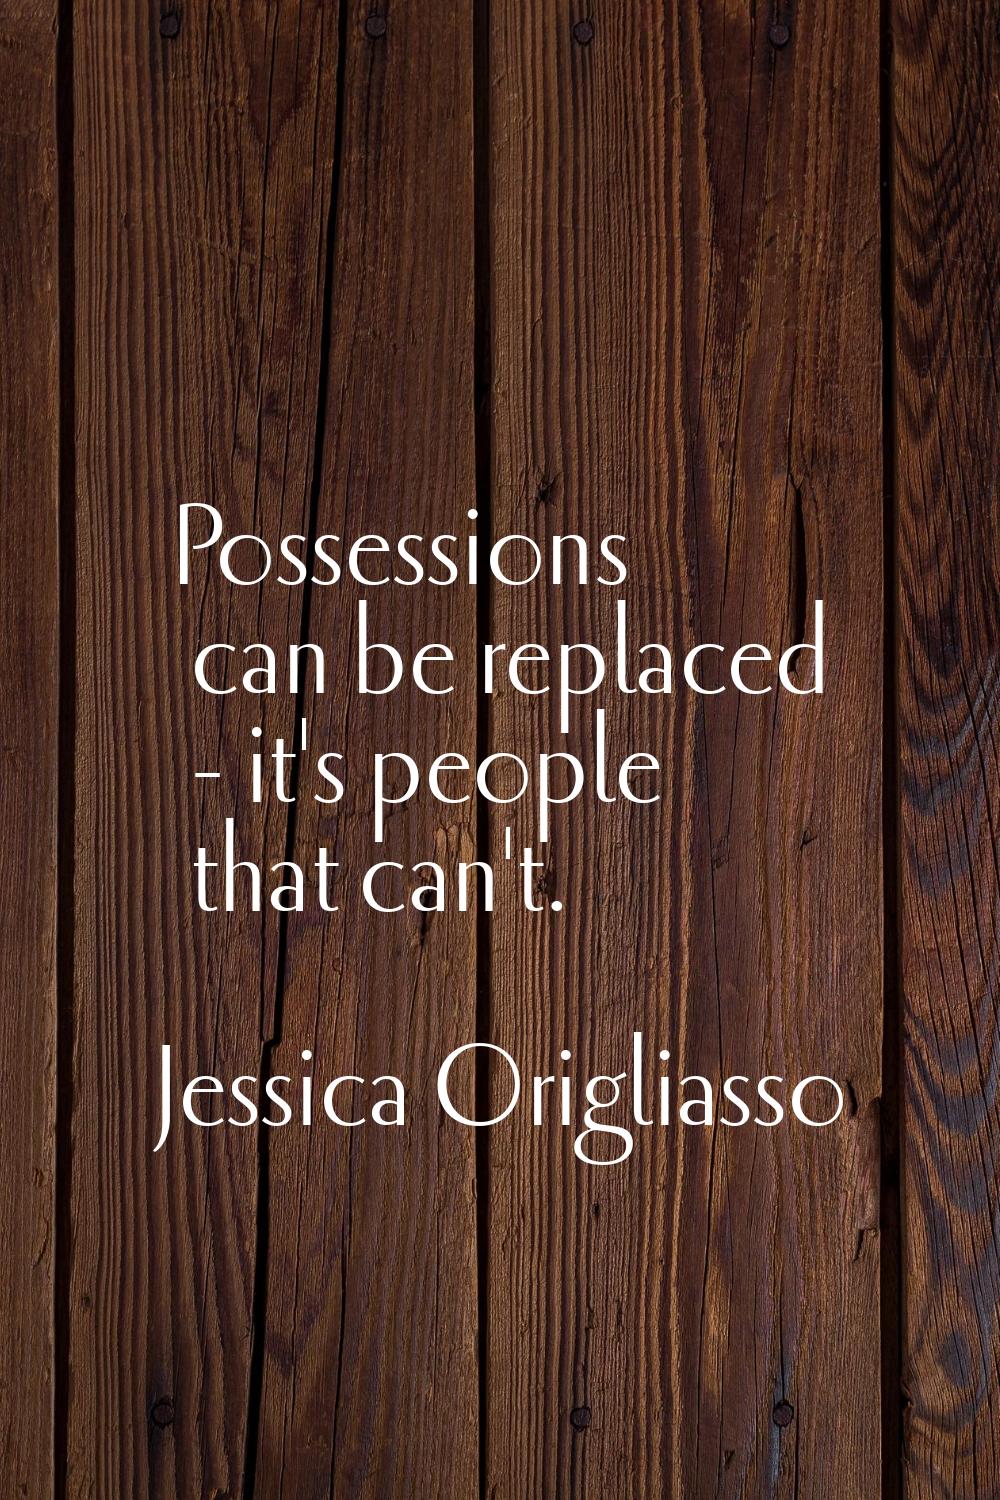 Possessions can be replaced - it's people that can't.